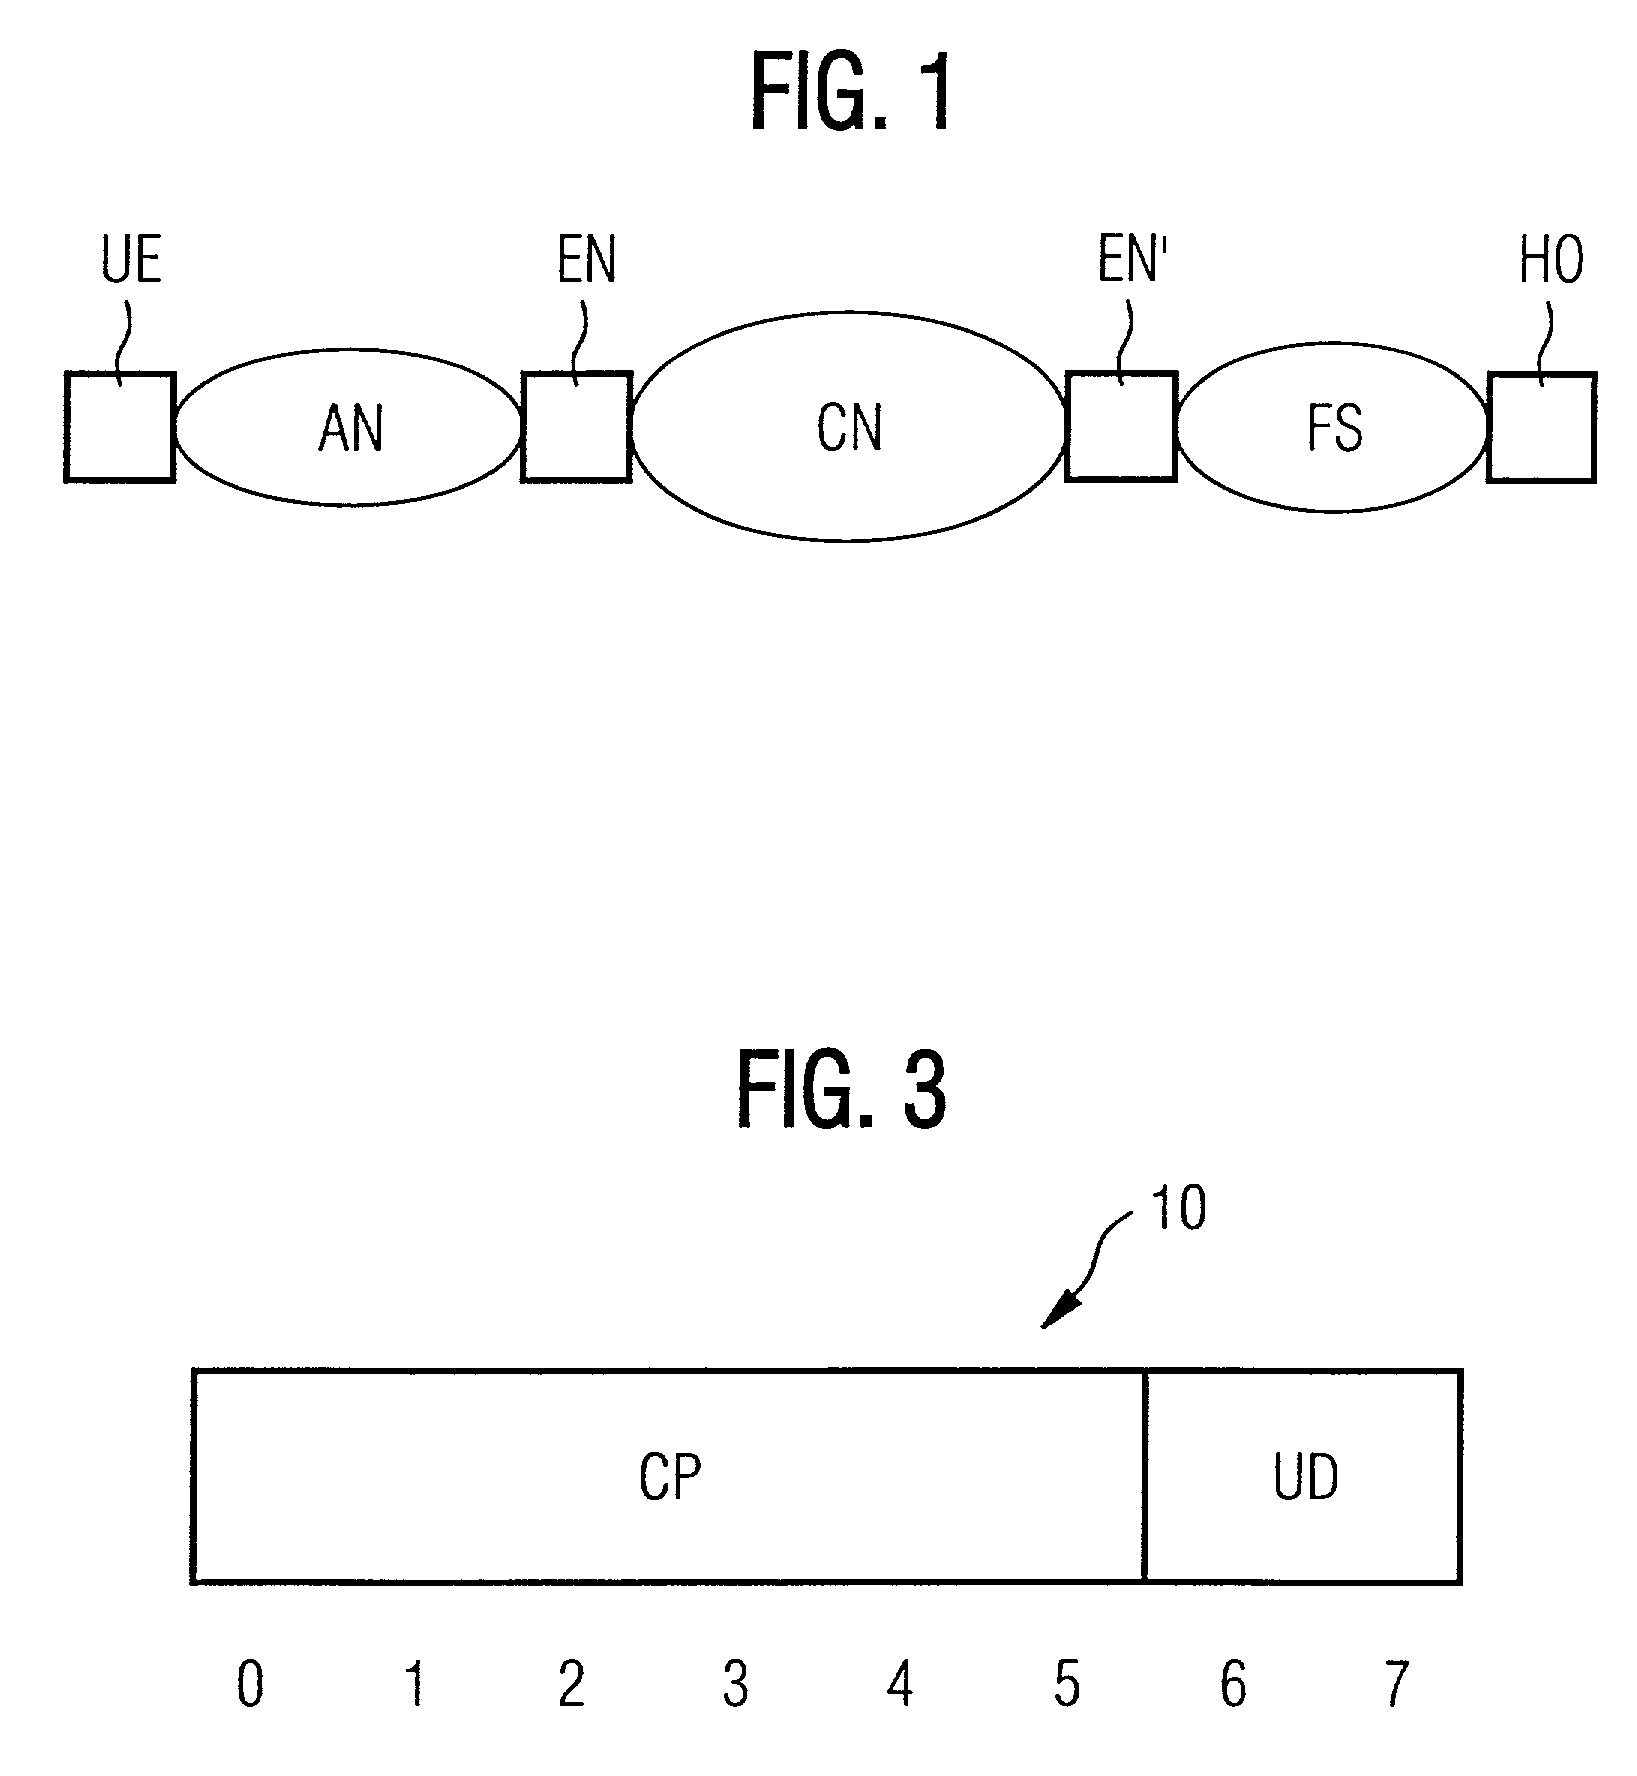 Method and devices to provide a defined quality of service in a packet switched communication network